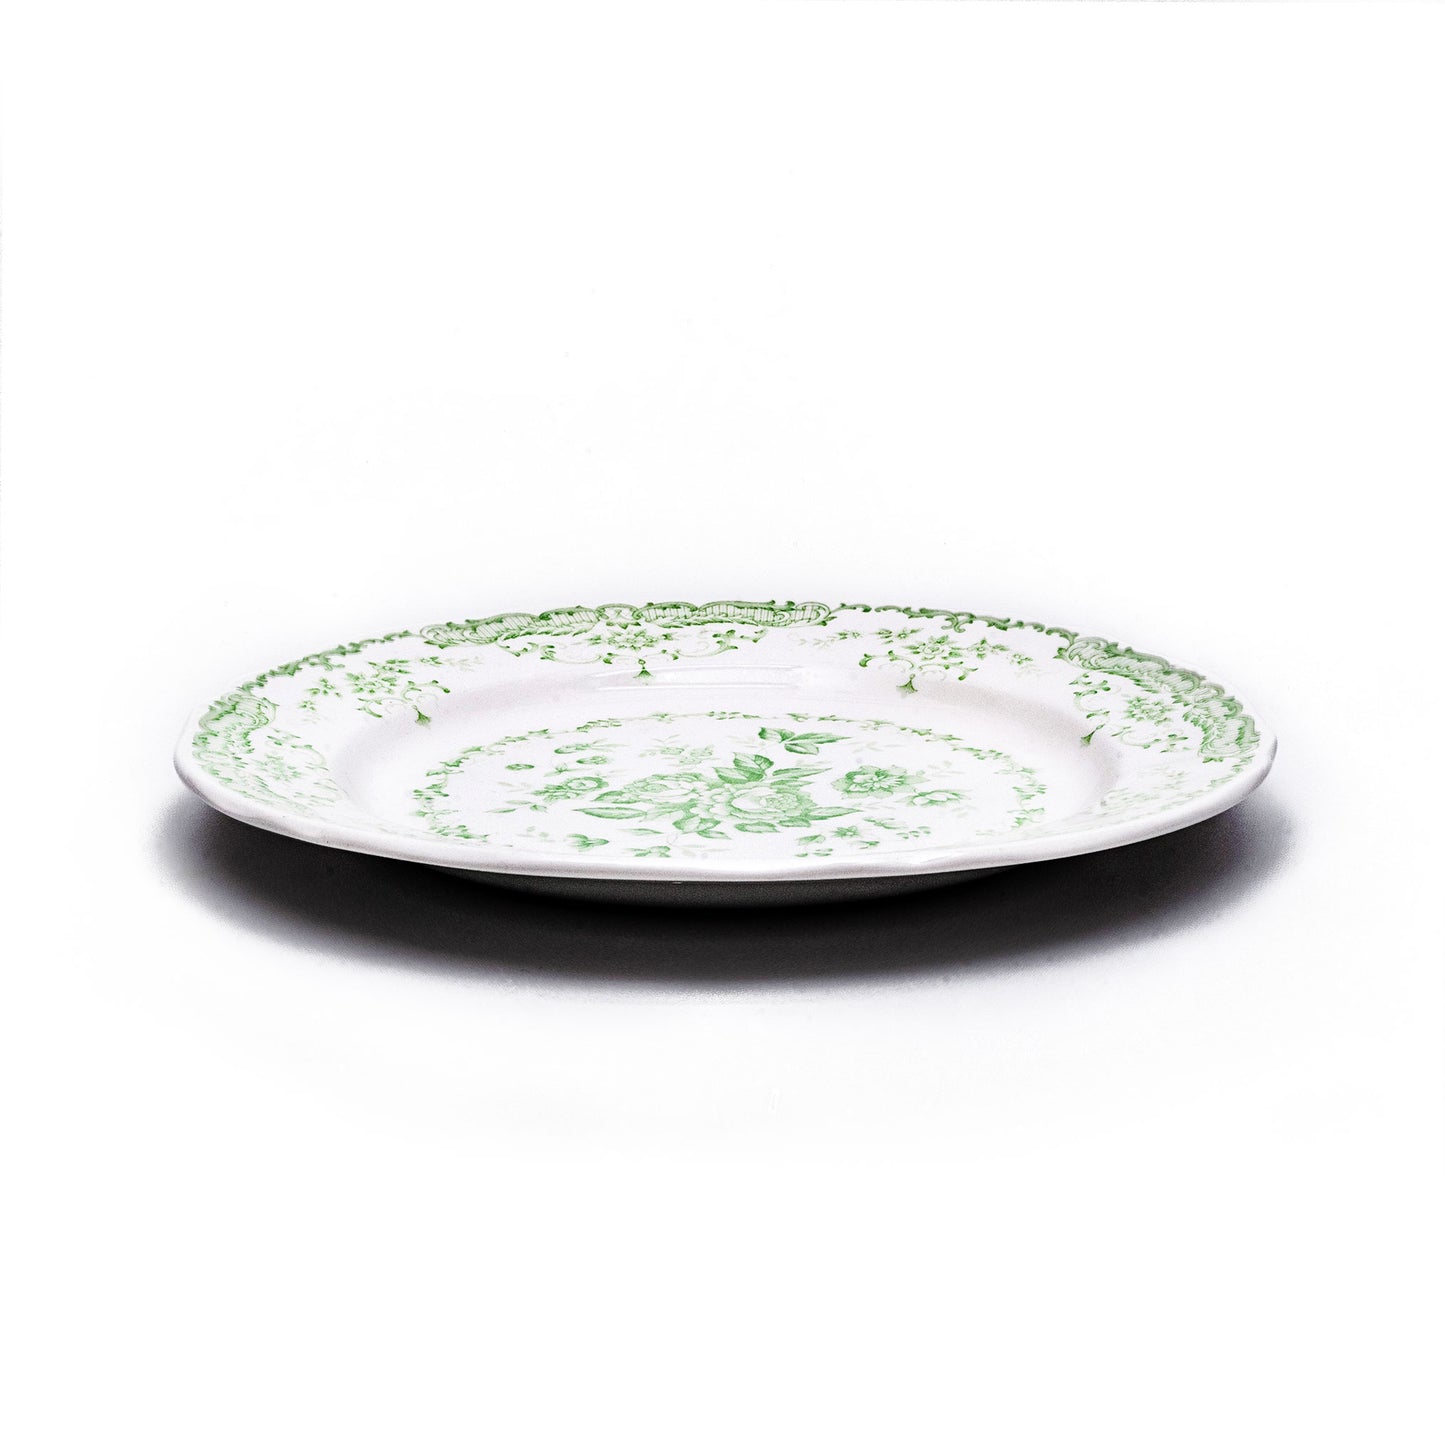 12" Round Charger Plate - Flowers